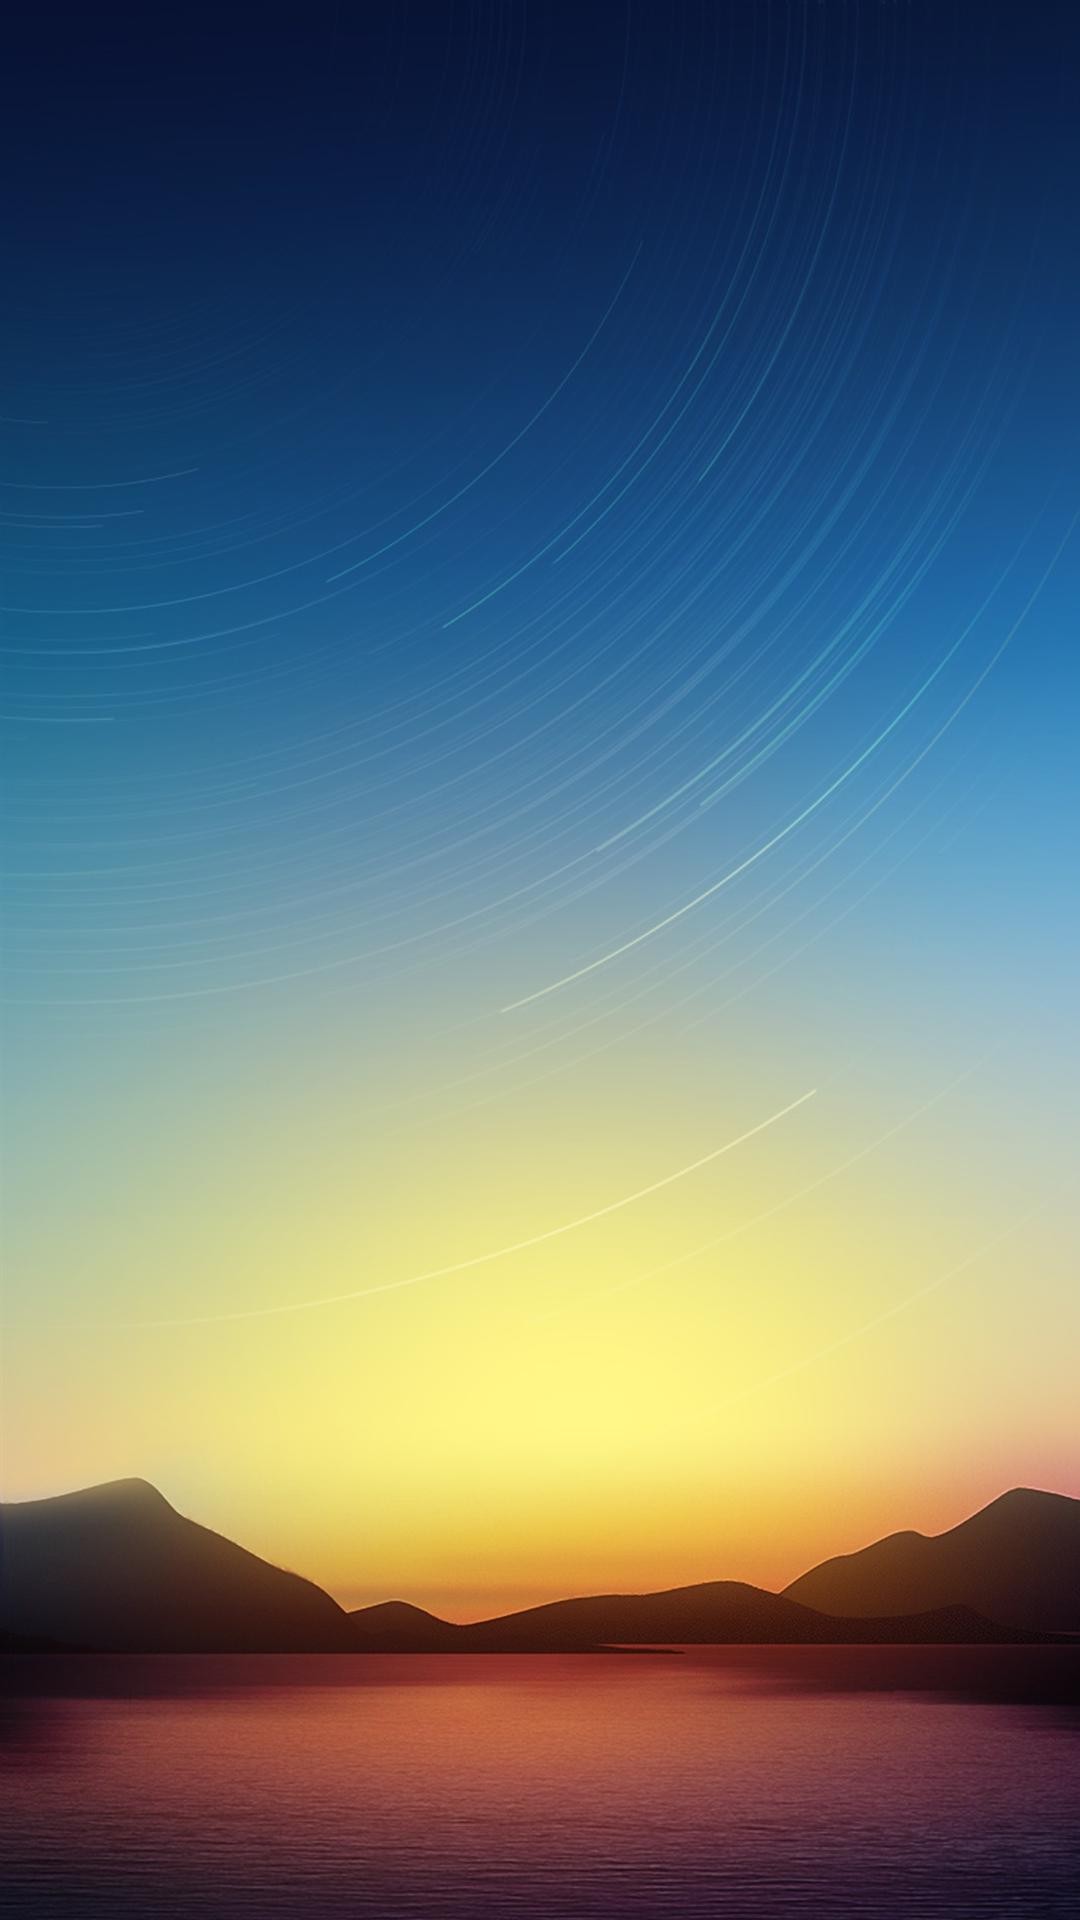 Sunset Galaxy S4 Wallpapers HD 42, HD, Galaxy S4 Wallpapers, S4 ...